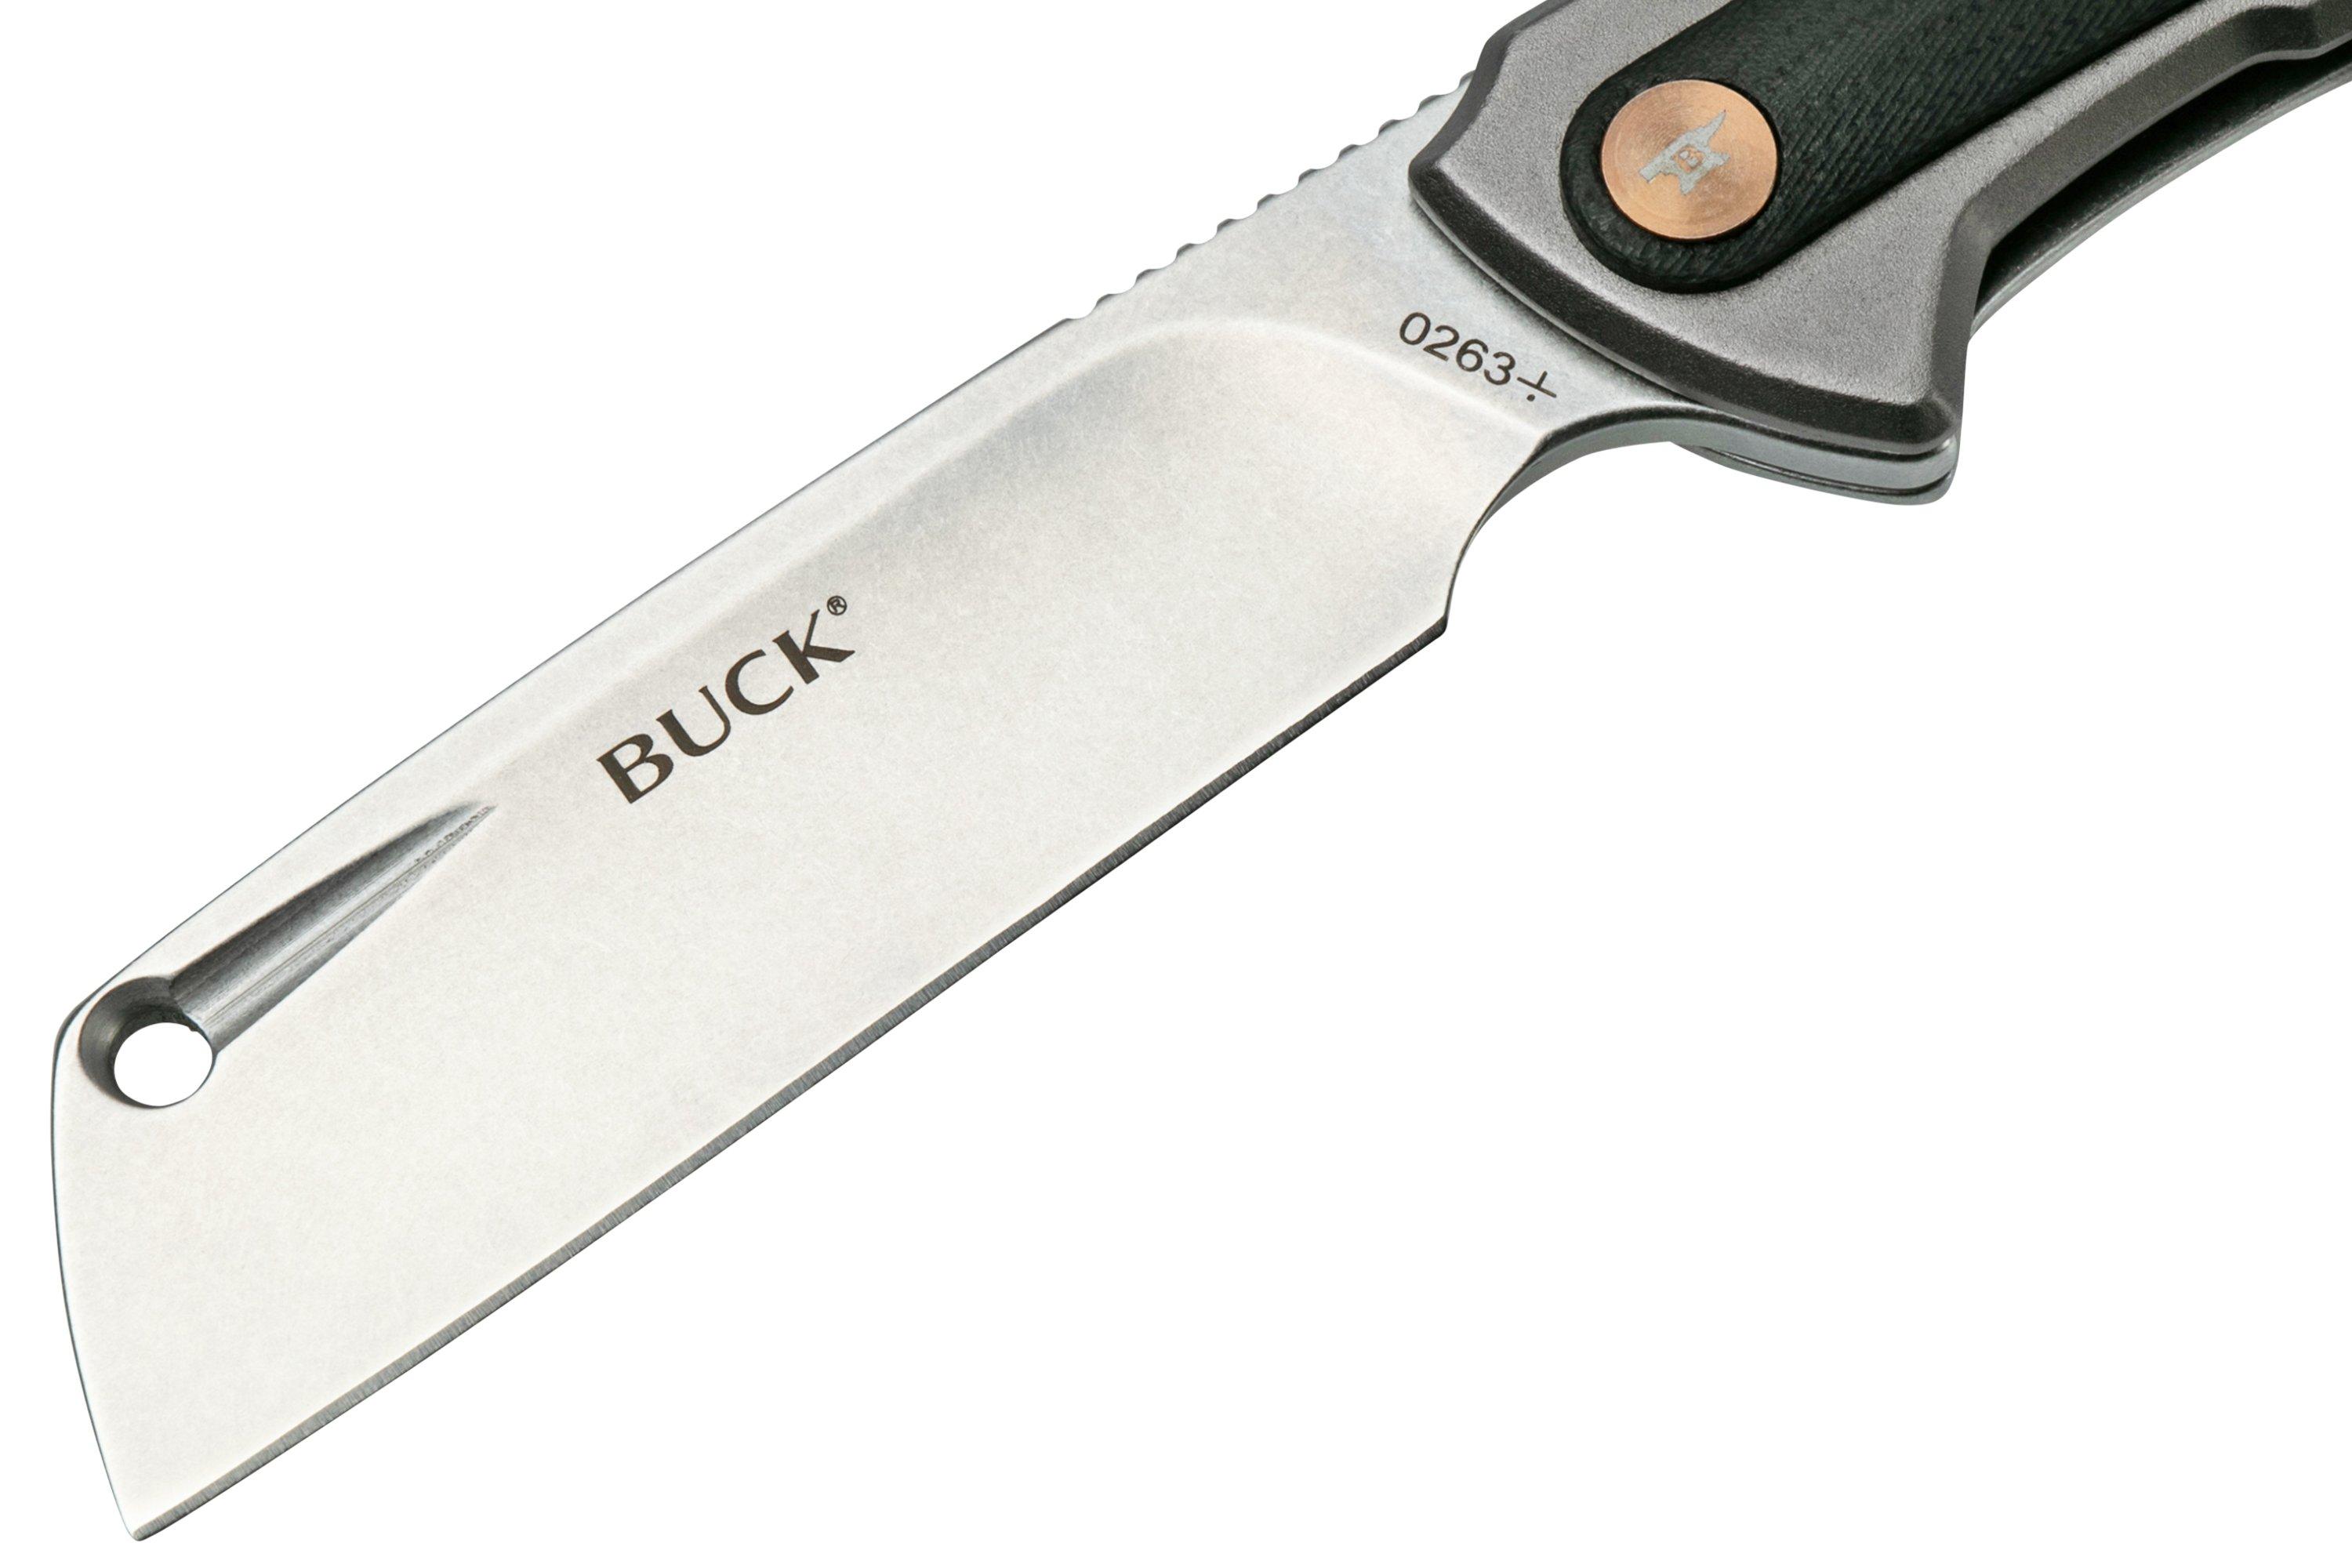 cleaver　shopping　Buck　HiLine　knife　Advantageously　263GYS　pocket　at